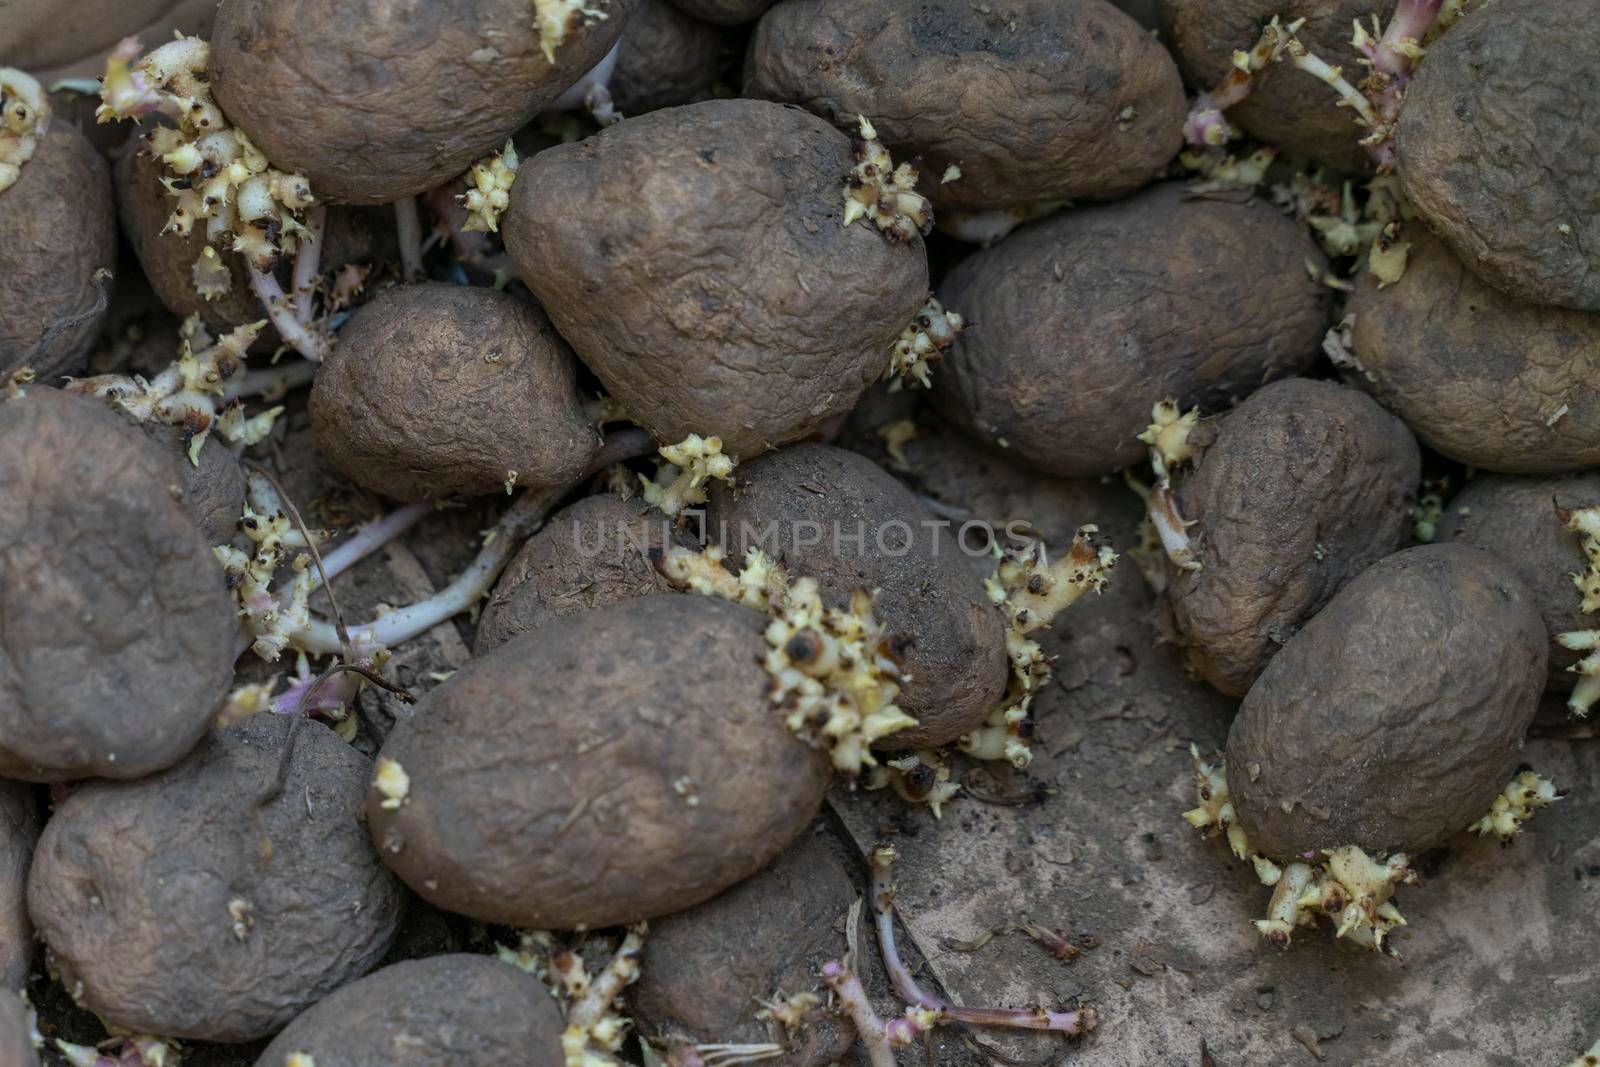 Sprouting seed potatoes ready for planting